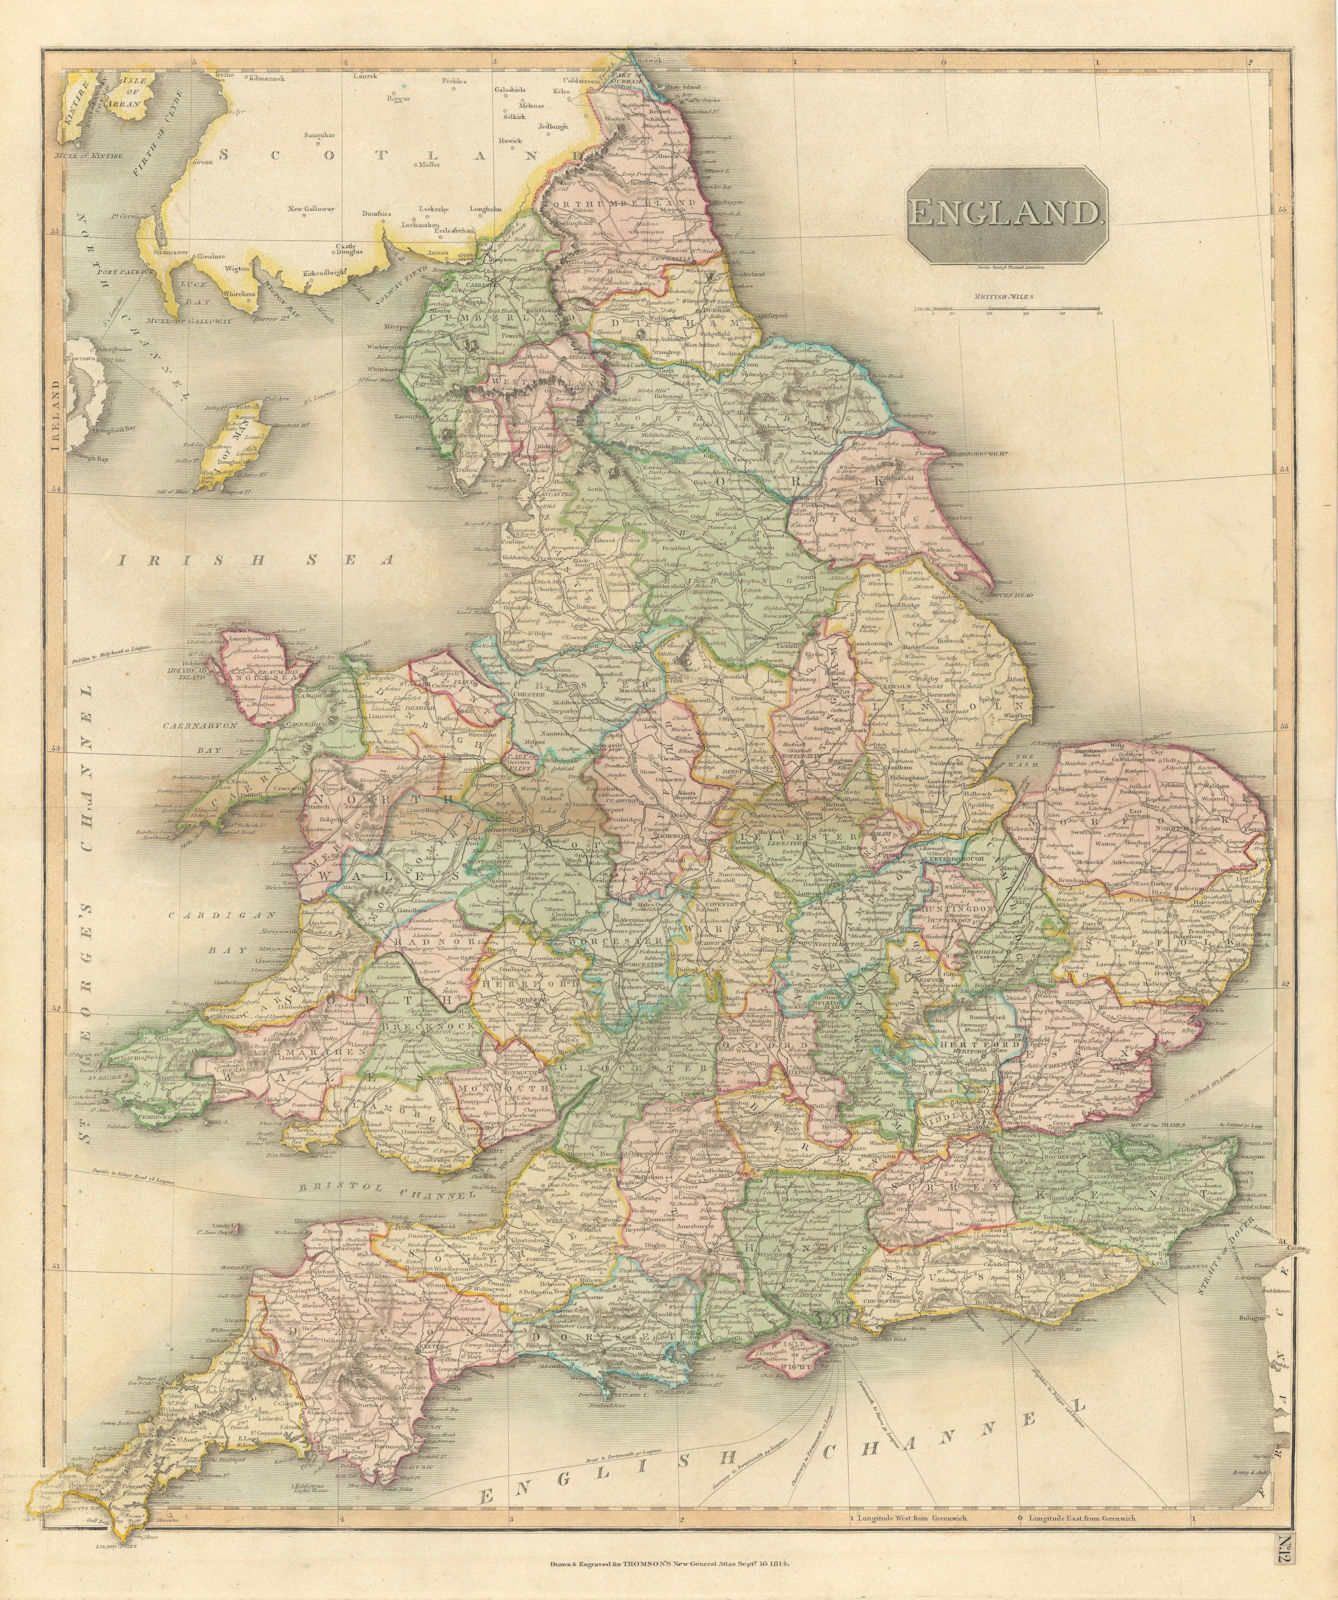 "England" by John Thomson. England and Wales. Coach roads & canals 1817 map